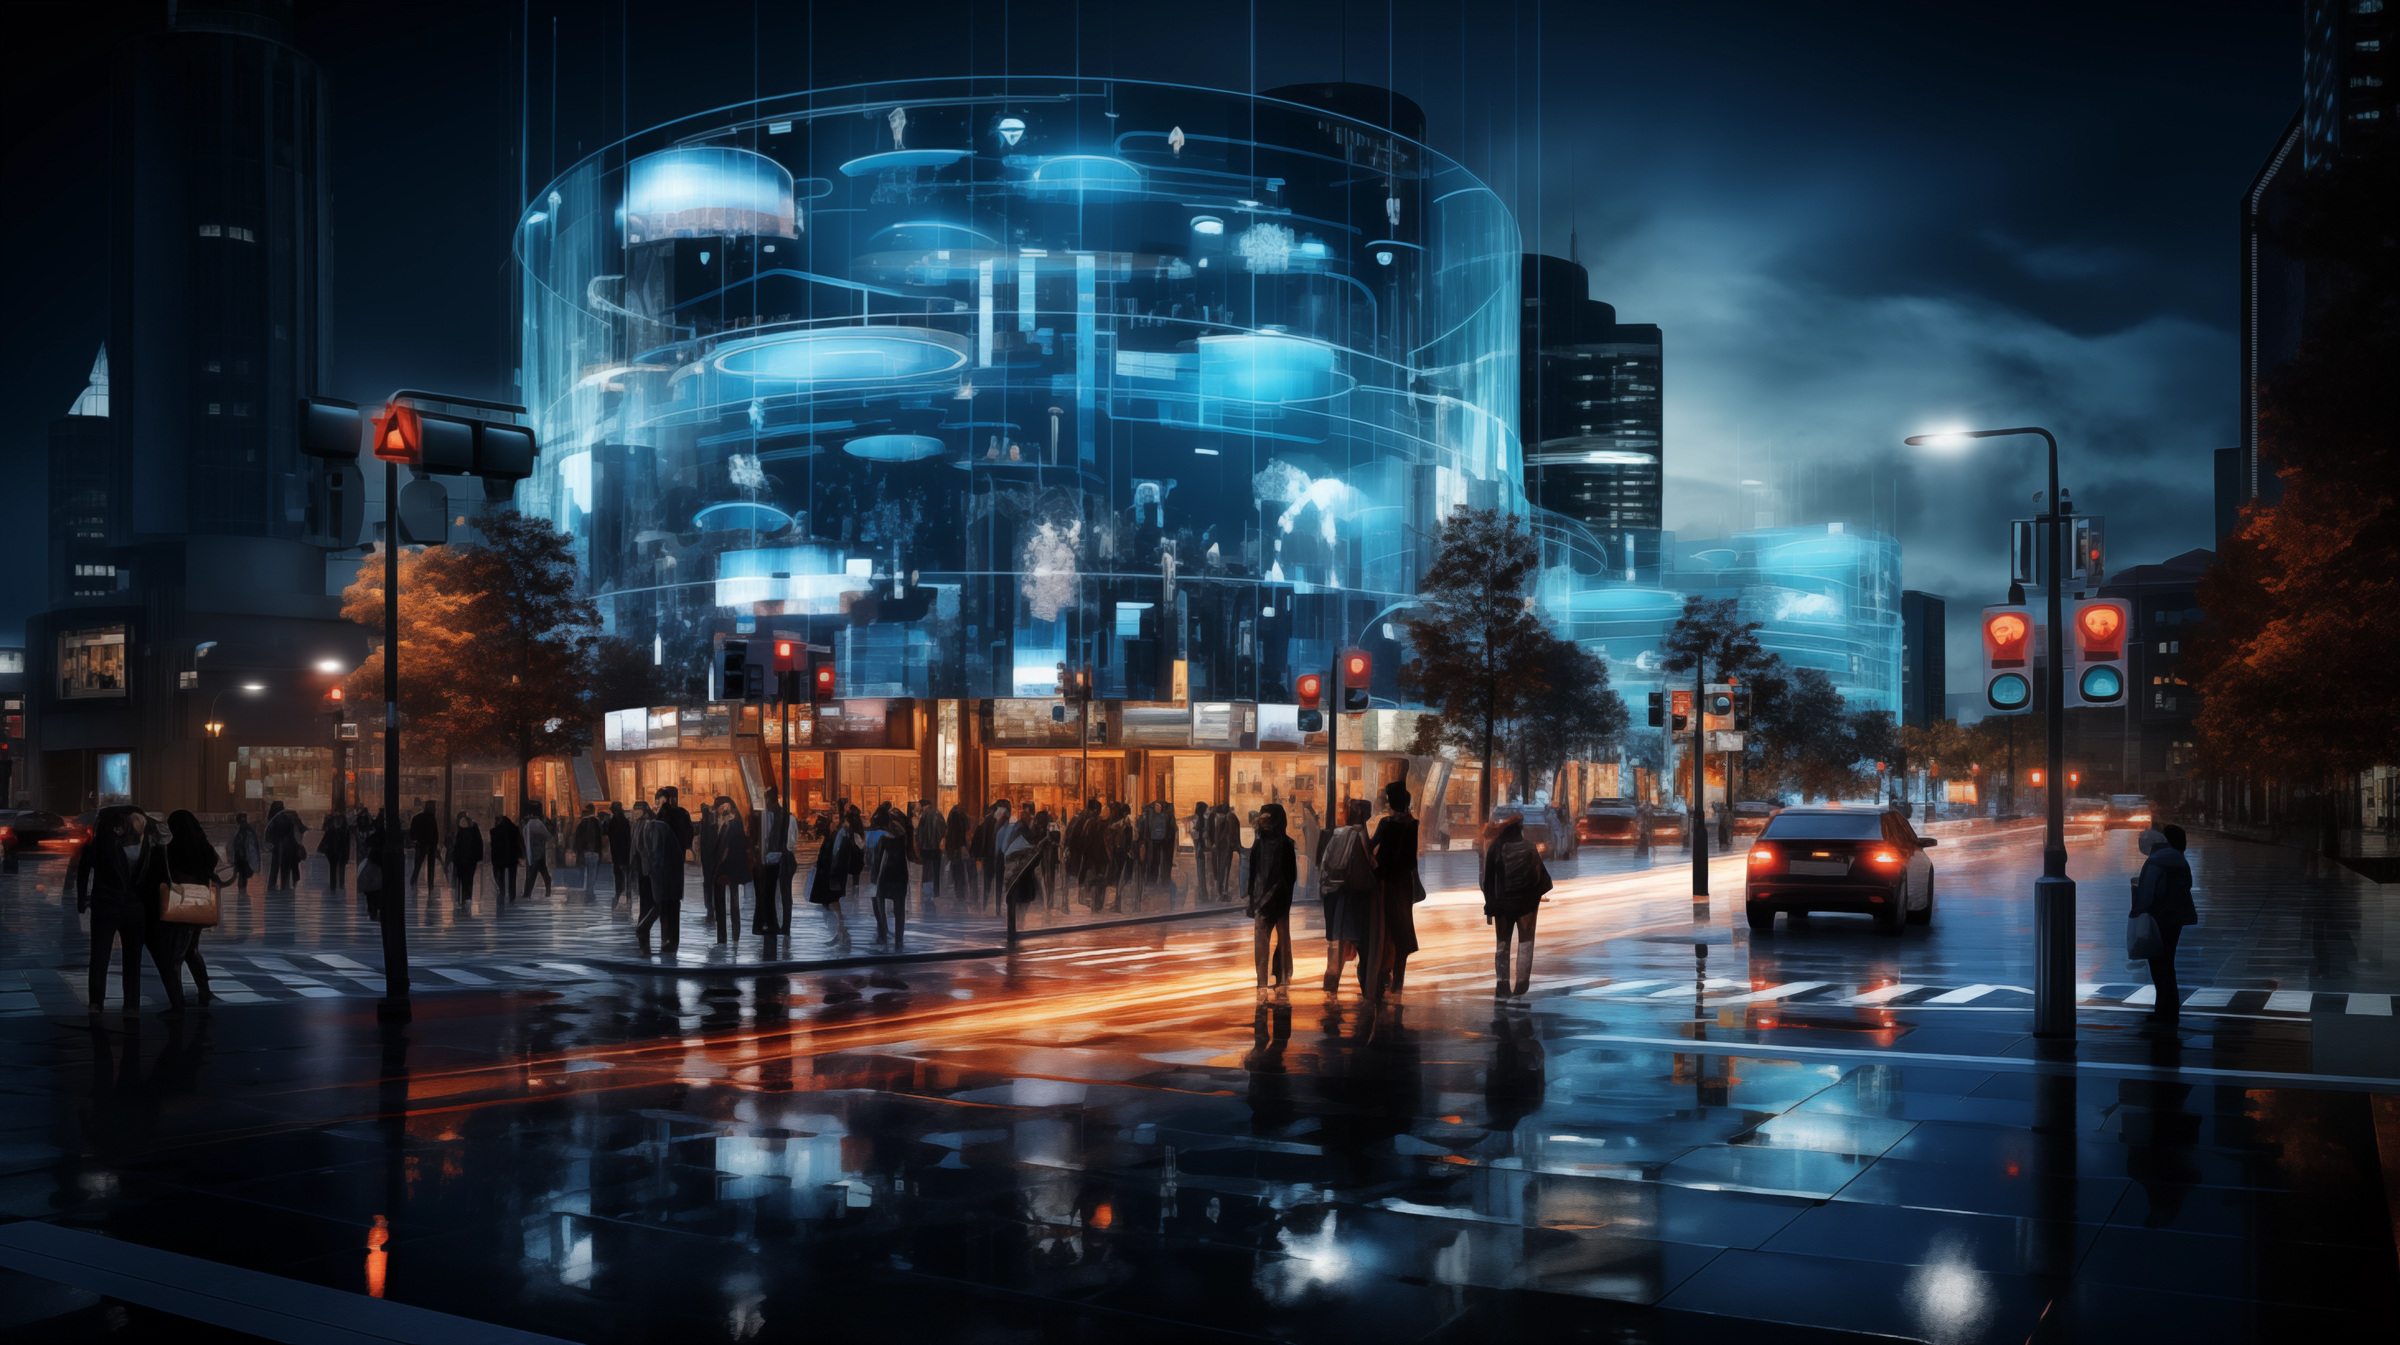 A futuristic cityscape at night with illuminated holographic displays showing traffic flow patterns and data processing, indicating AI-enabled real-time responses to urban needs.